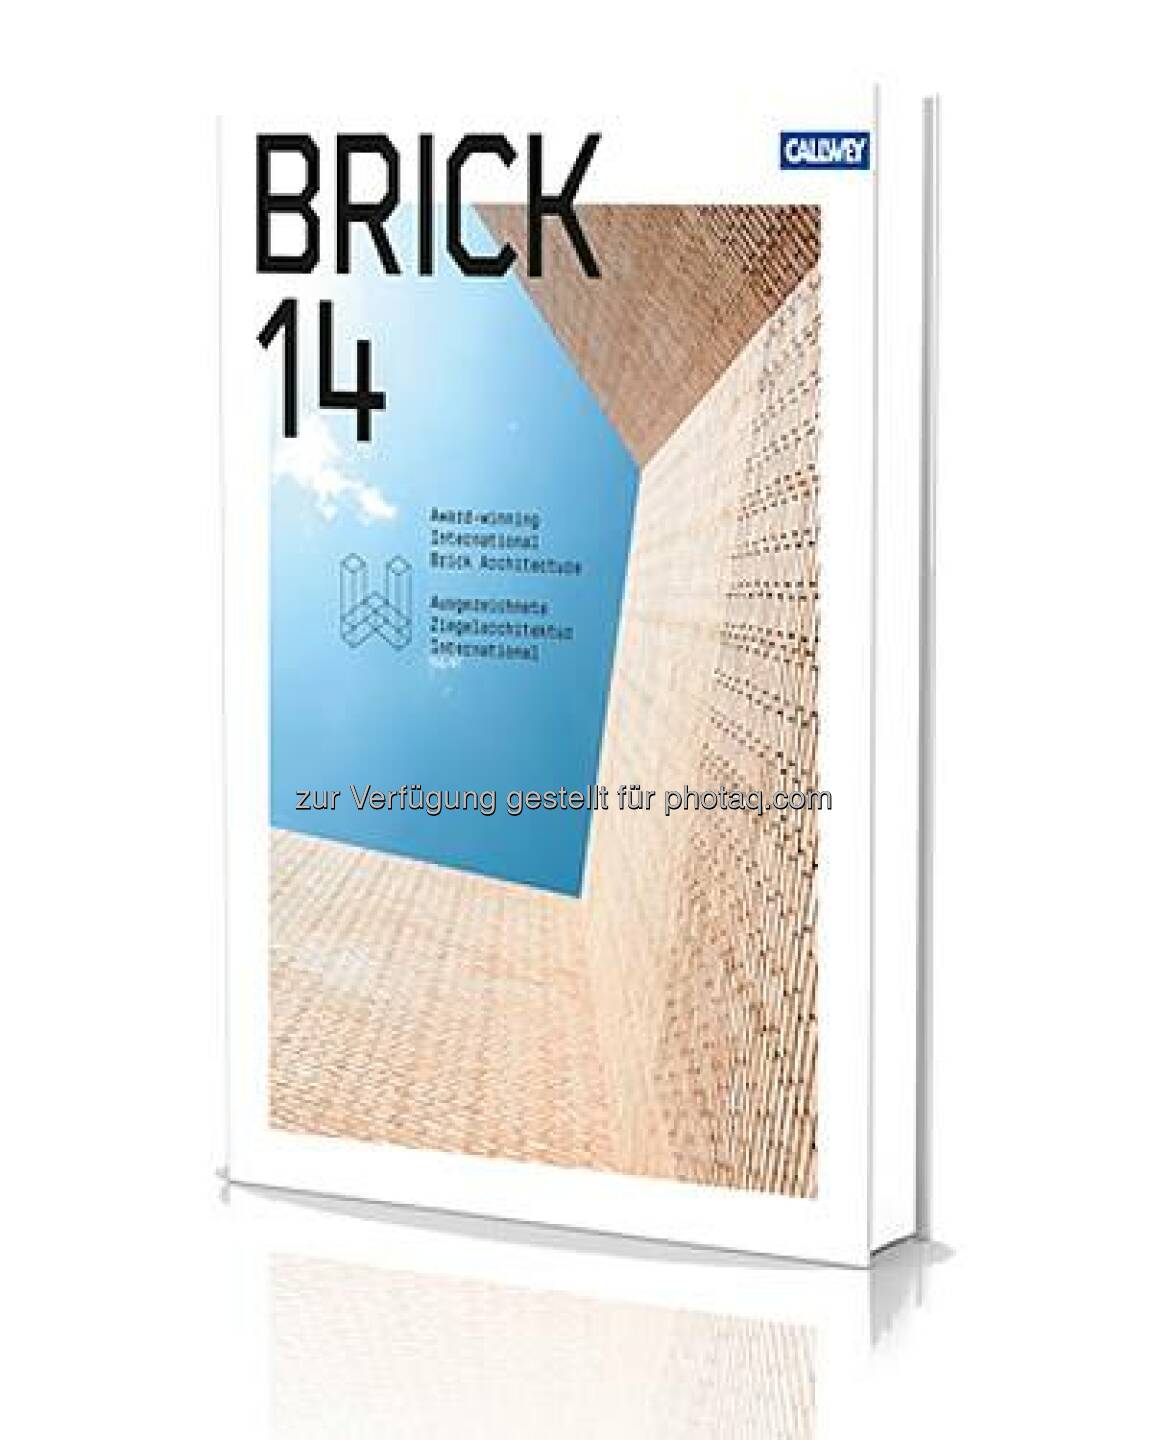 A few more days to go! We are giving away 10 “BRICK 14″ books until the end of May. So hurry up and test your knowledge around the Wienerberger Brick Award 2014. http://www.brickaward.com/book/brick-award-2014-quiz/  Source: http://facebook.com/wienerberger